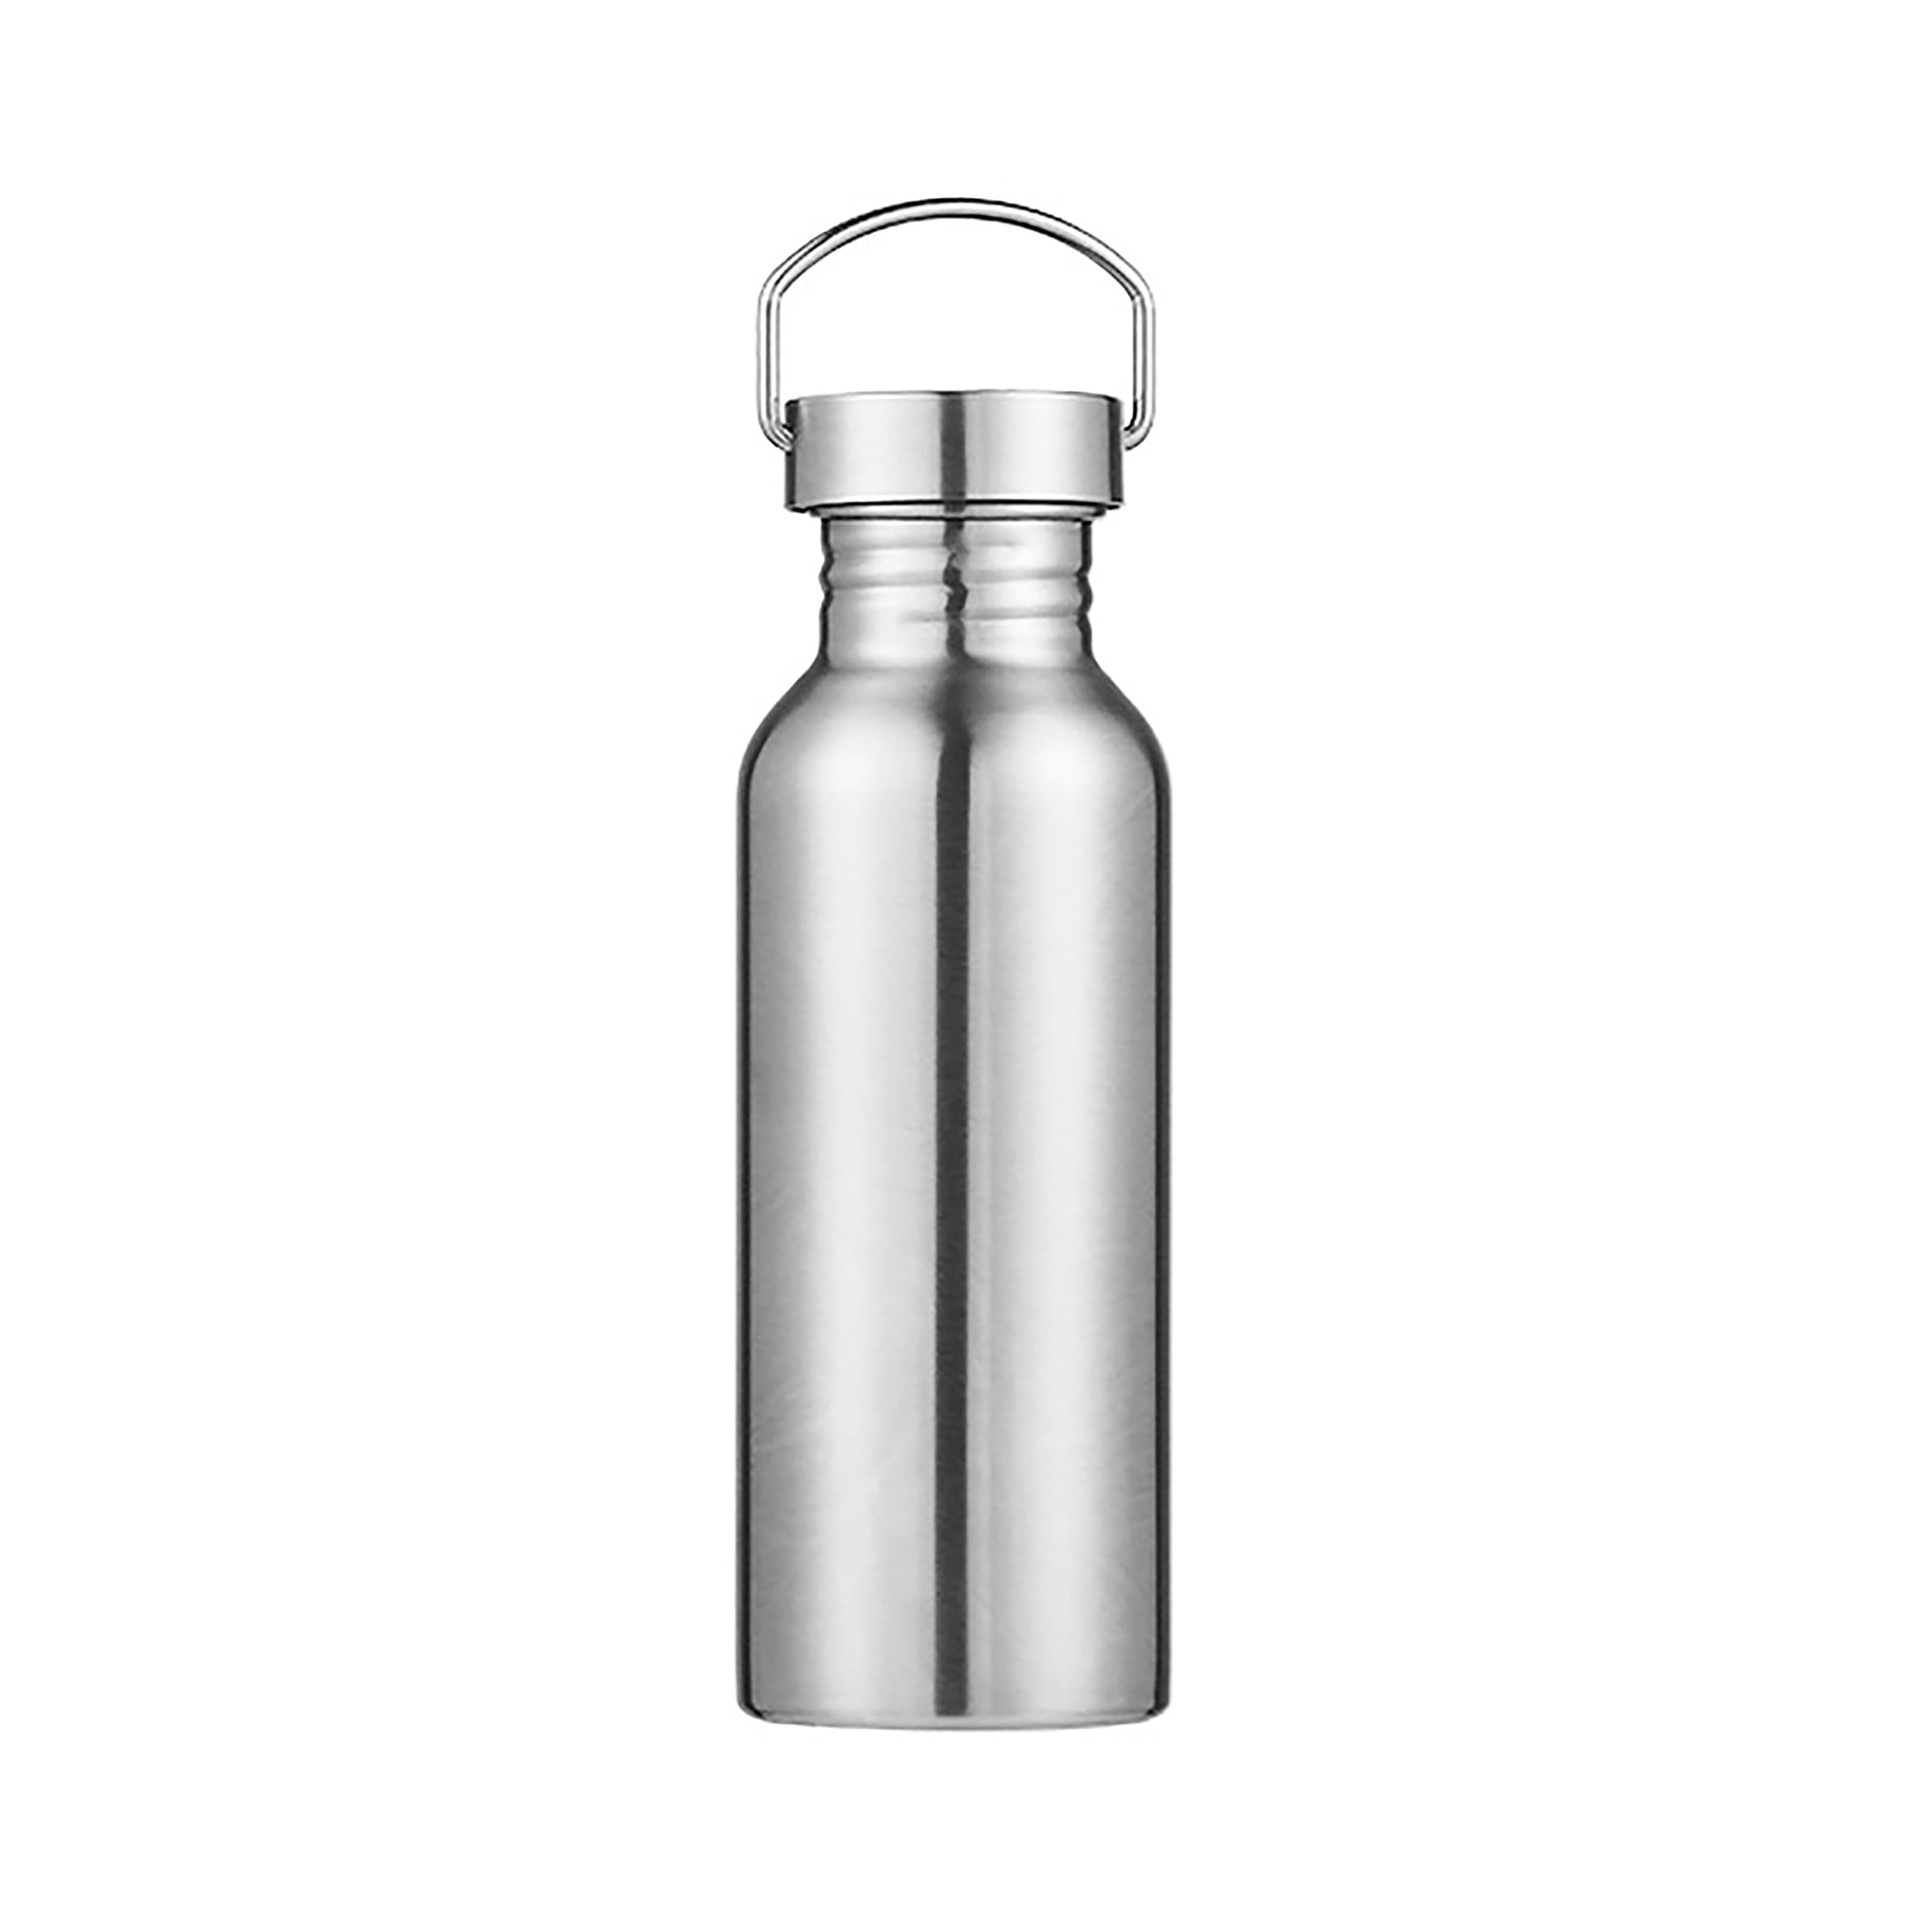 Details about   Stainless Steel Water Bottle 